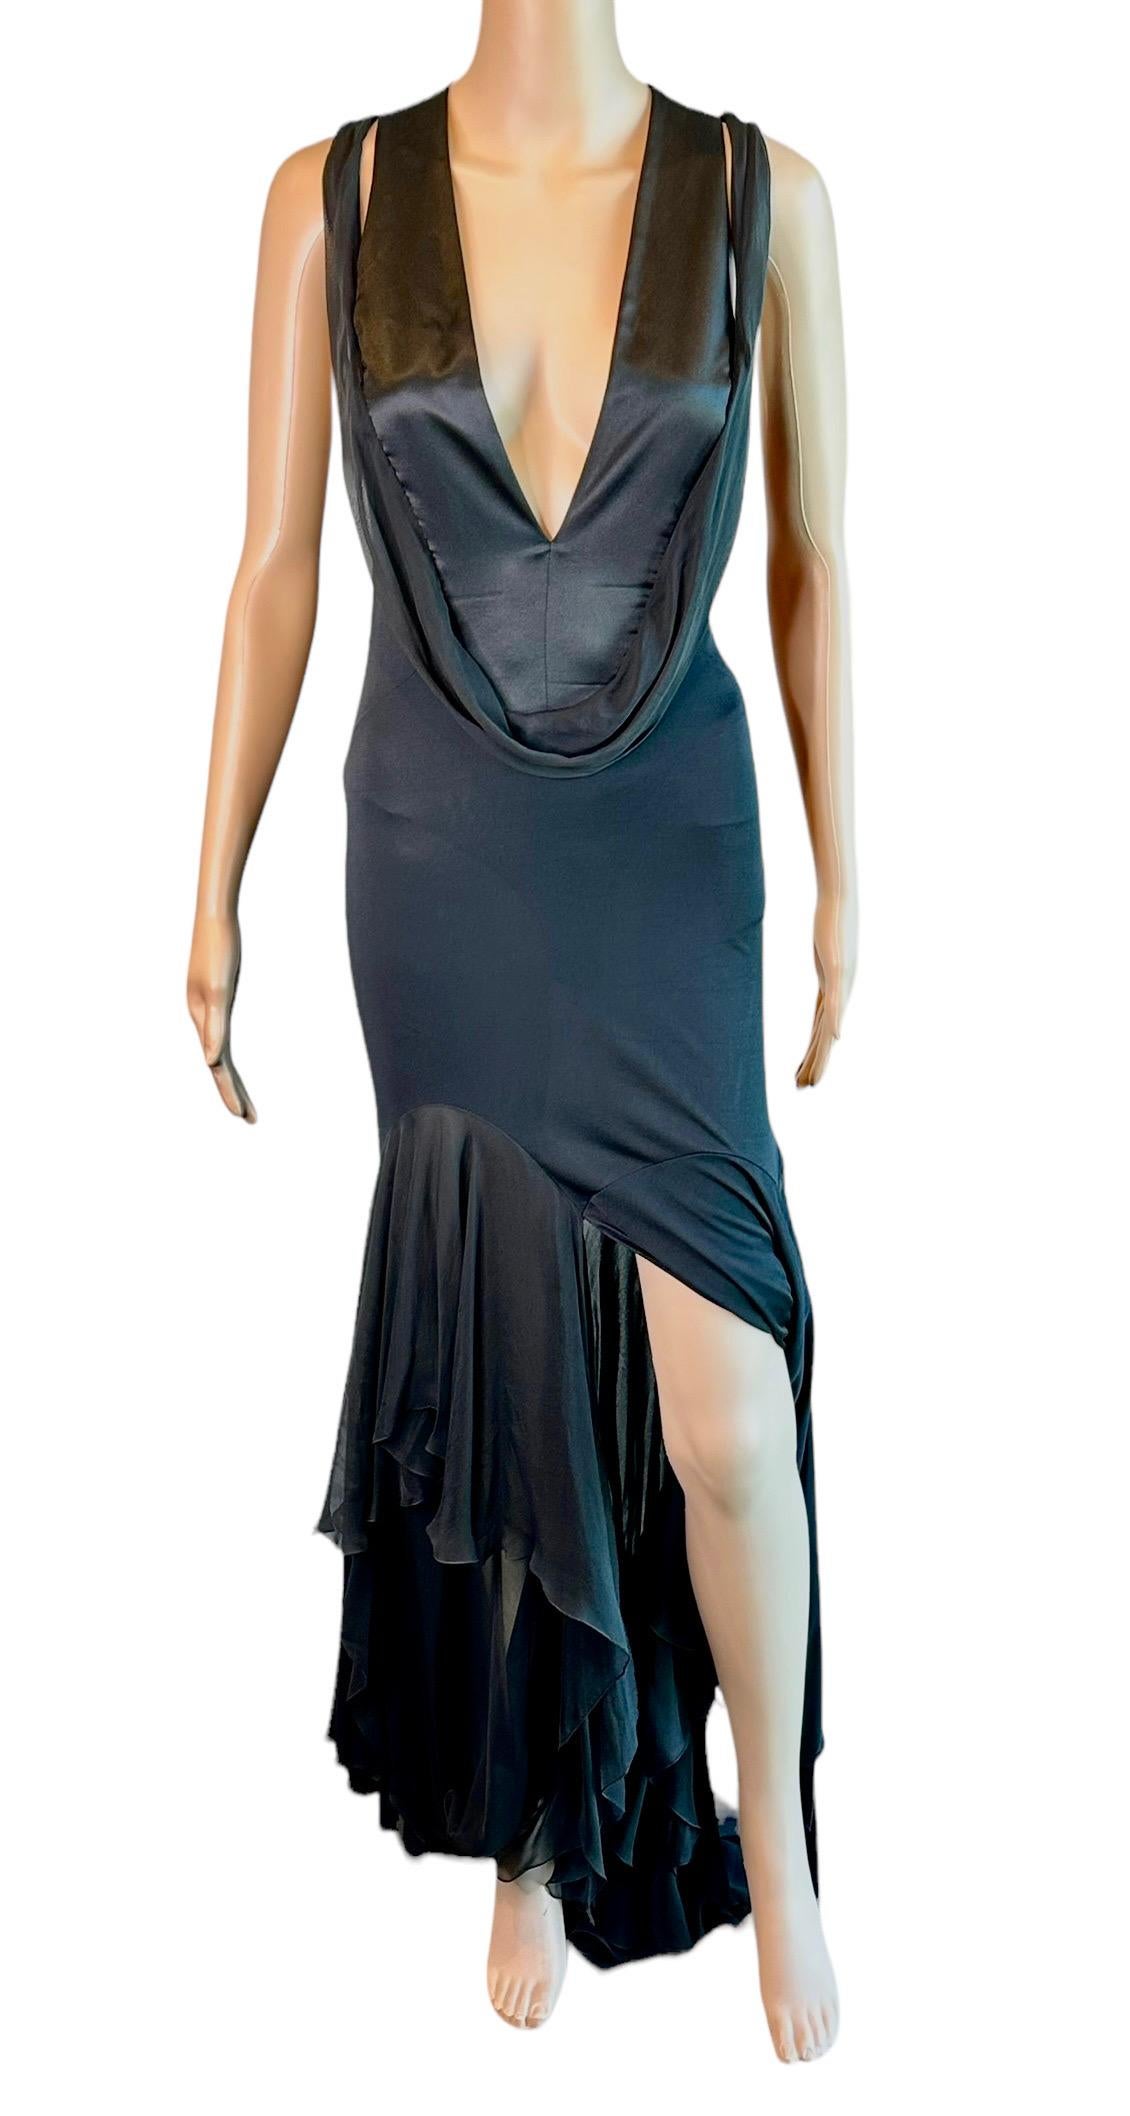 Versace S/S 2004 Plunged Halter Open Back Ruffles Black Evening Dress Gown  For Sale 7